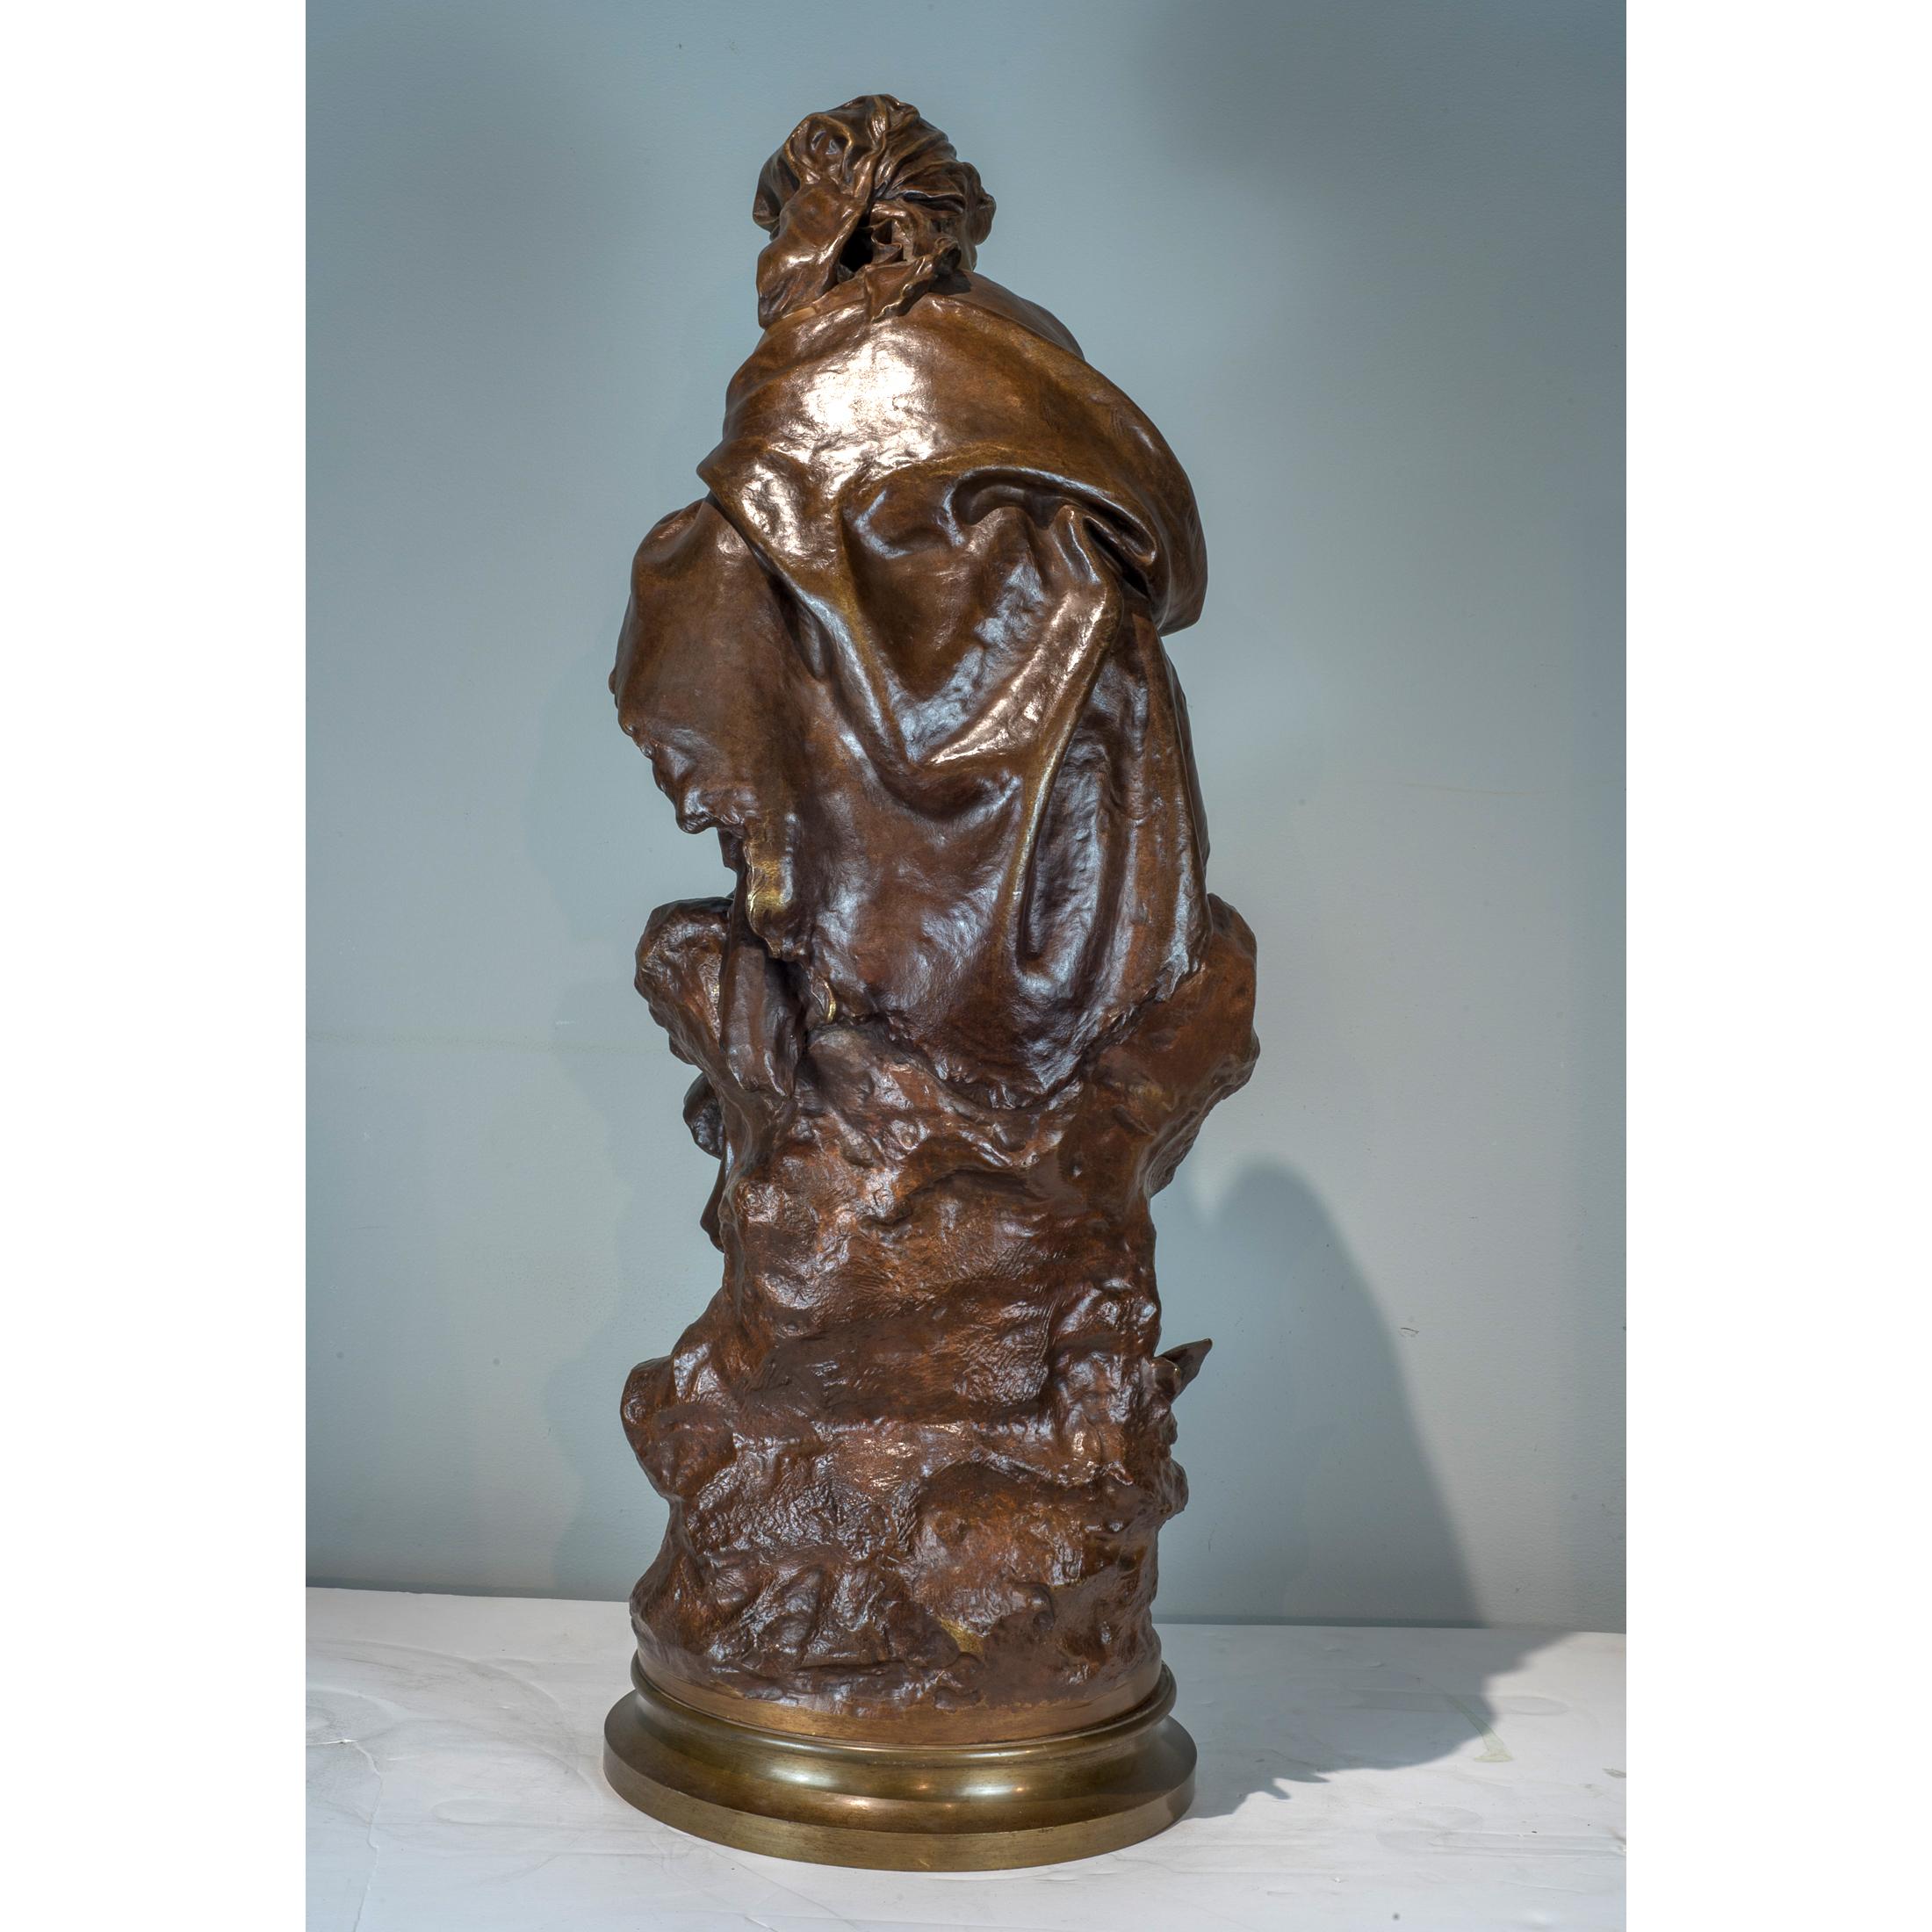 MATHURIN MOREAU
French, (1822-1912)

Signed ‘Math.Moreau’ 
36 in. x 14 1/2 in.


Notes: Fine Quality Patinated Bronze Group of a Mother and Child